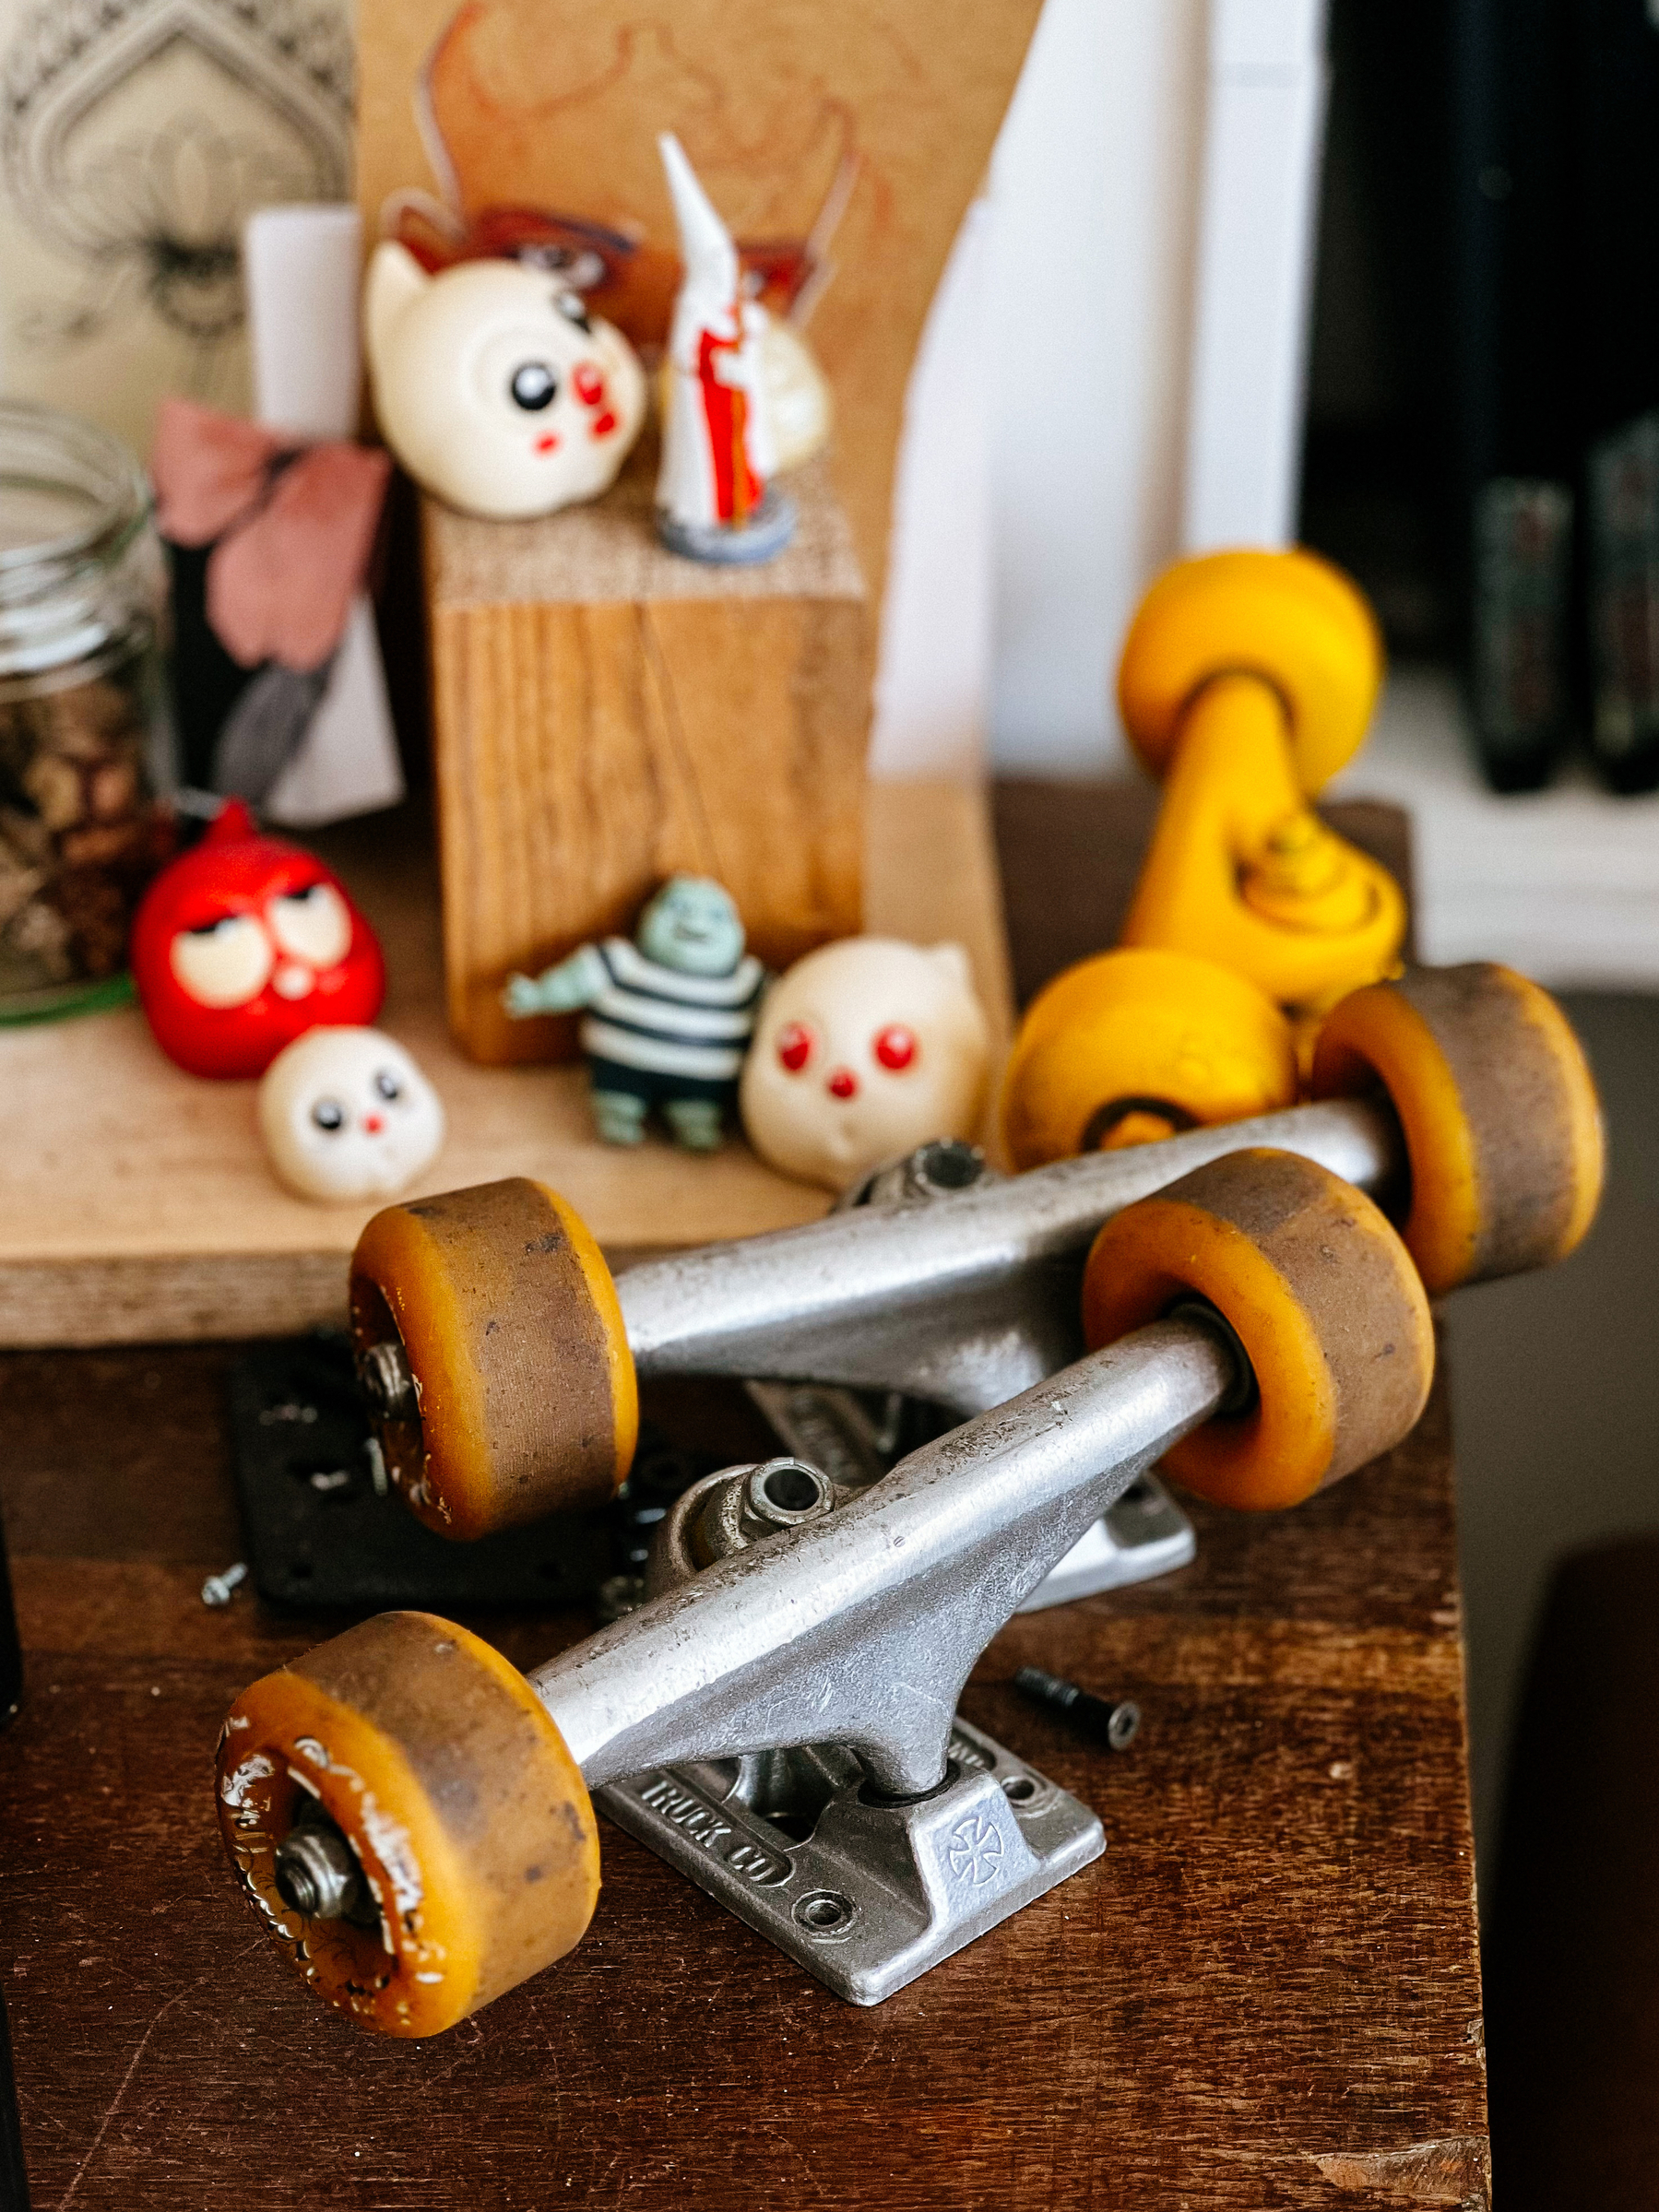 Skate parts and other assorted toys on a desk. 